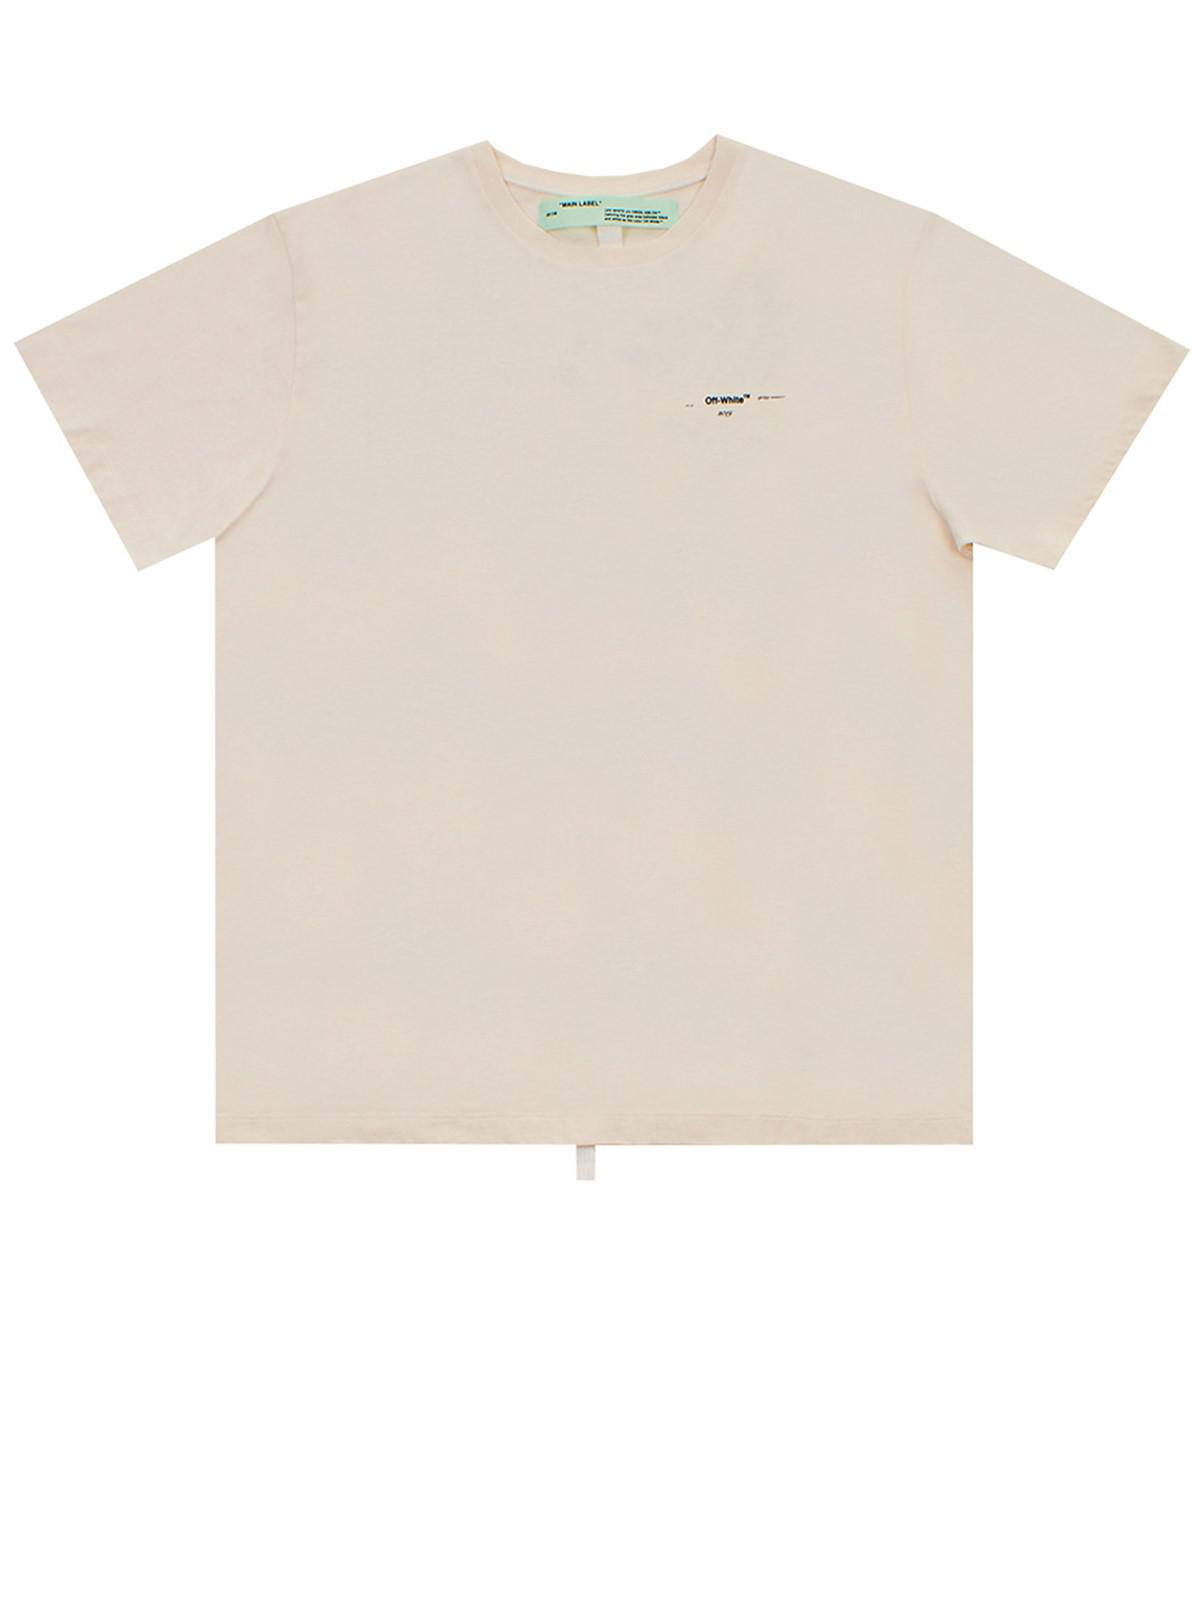 Off-White c/o Virgil Abloh Cream Colored Arrows T-shirt in Natural